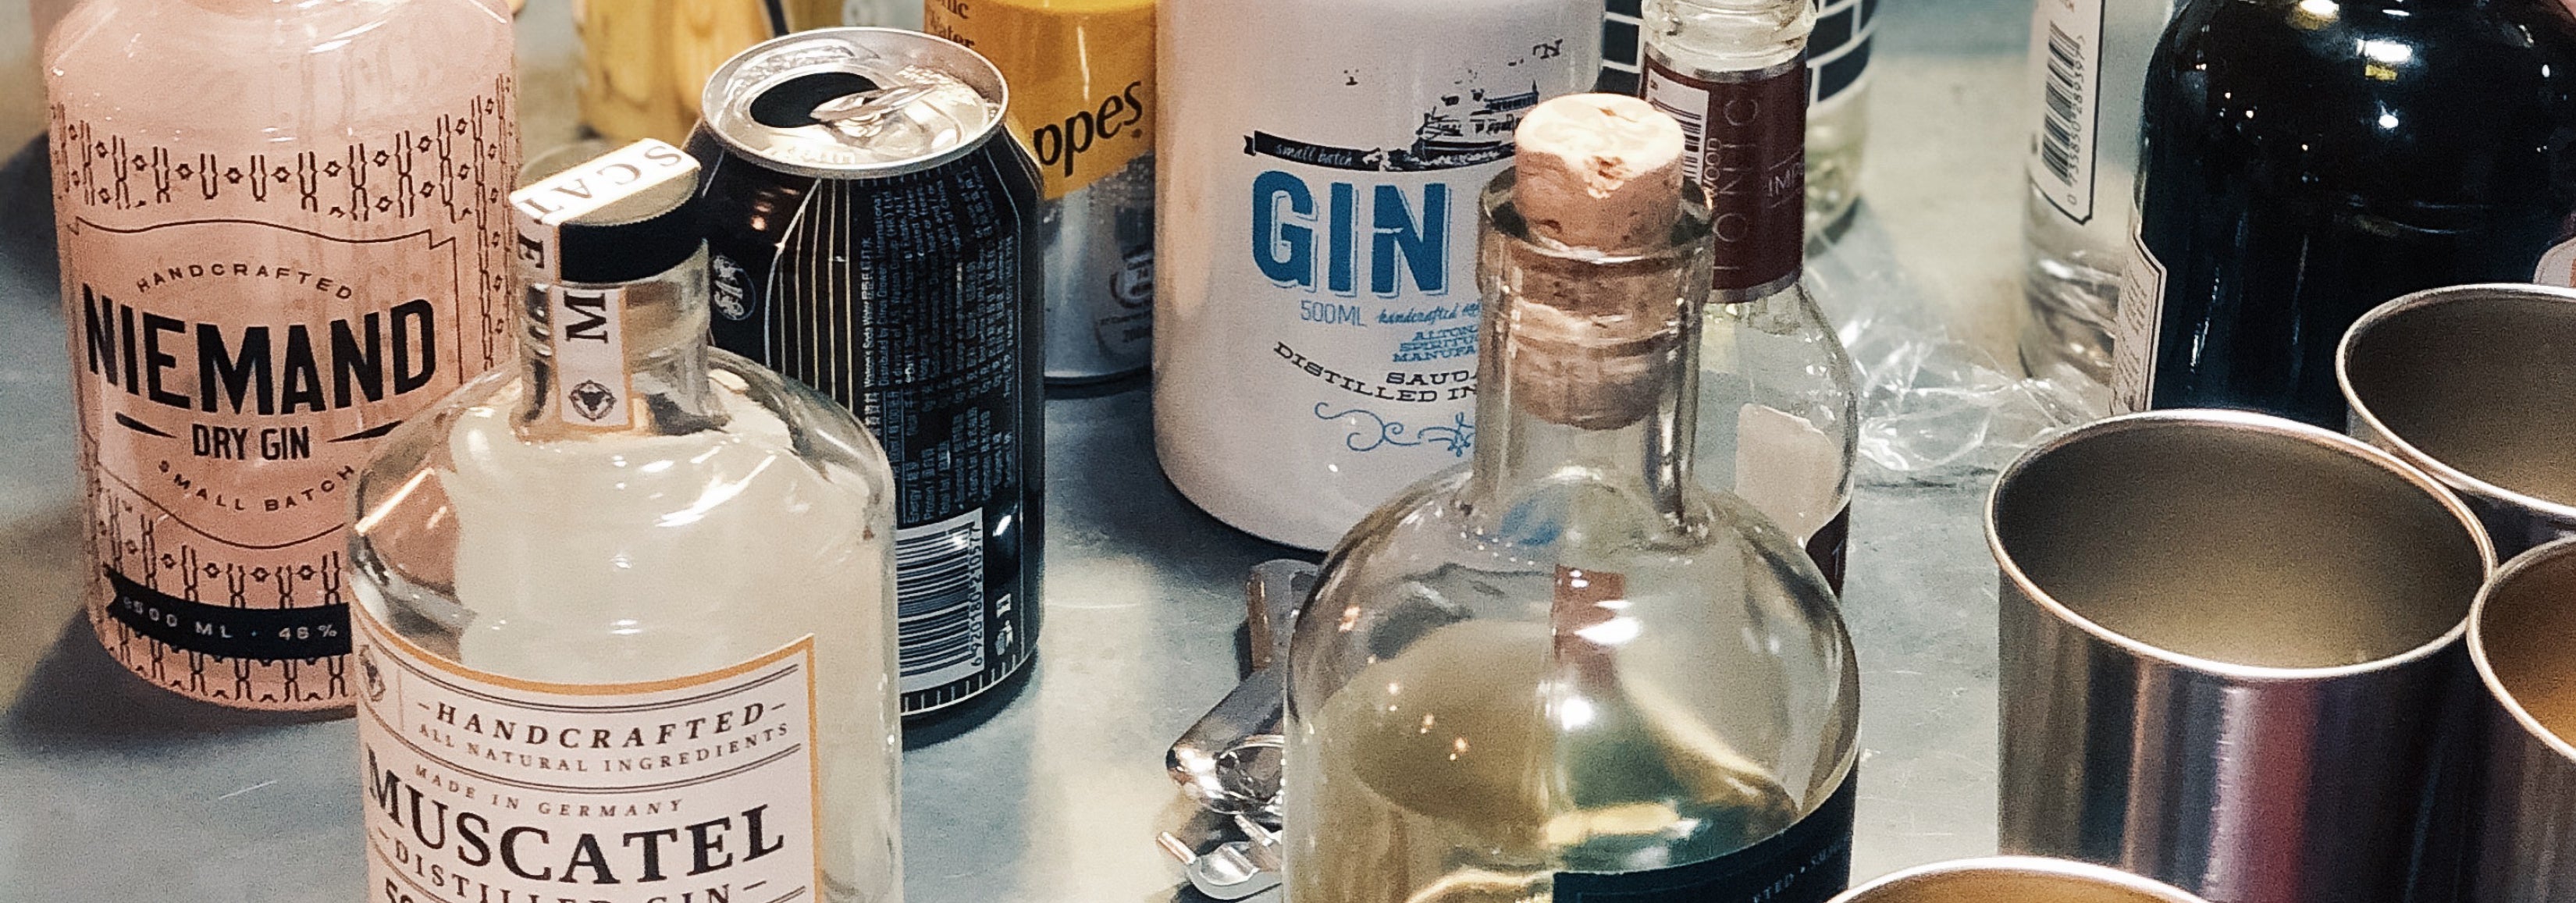 5 Projects to Upcycle Your Gin Bottles 